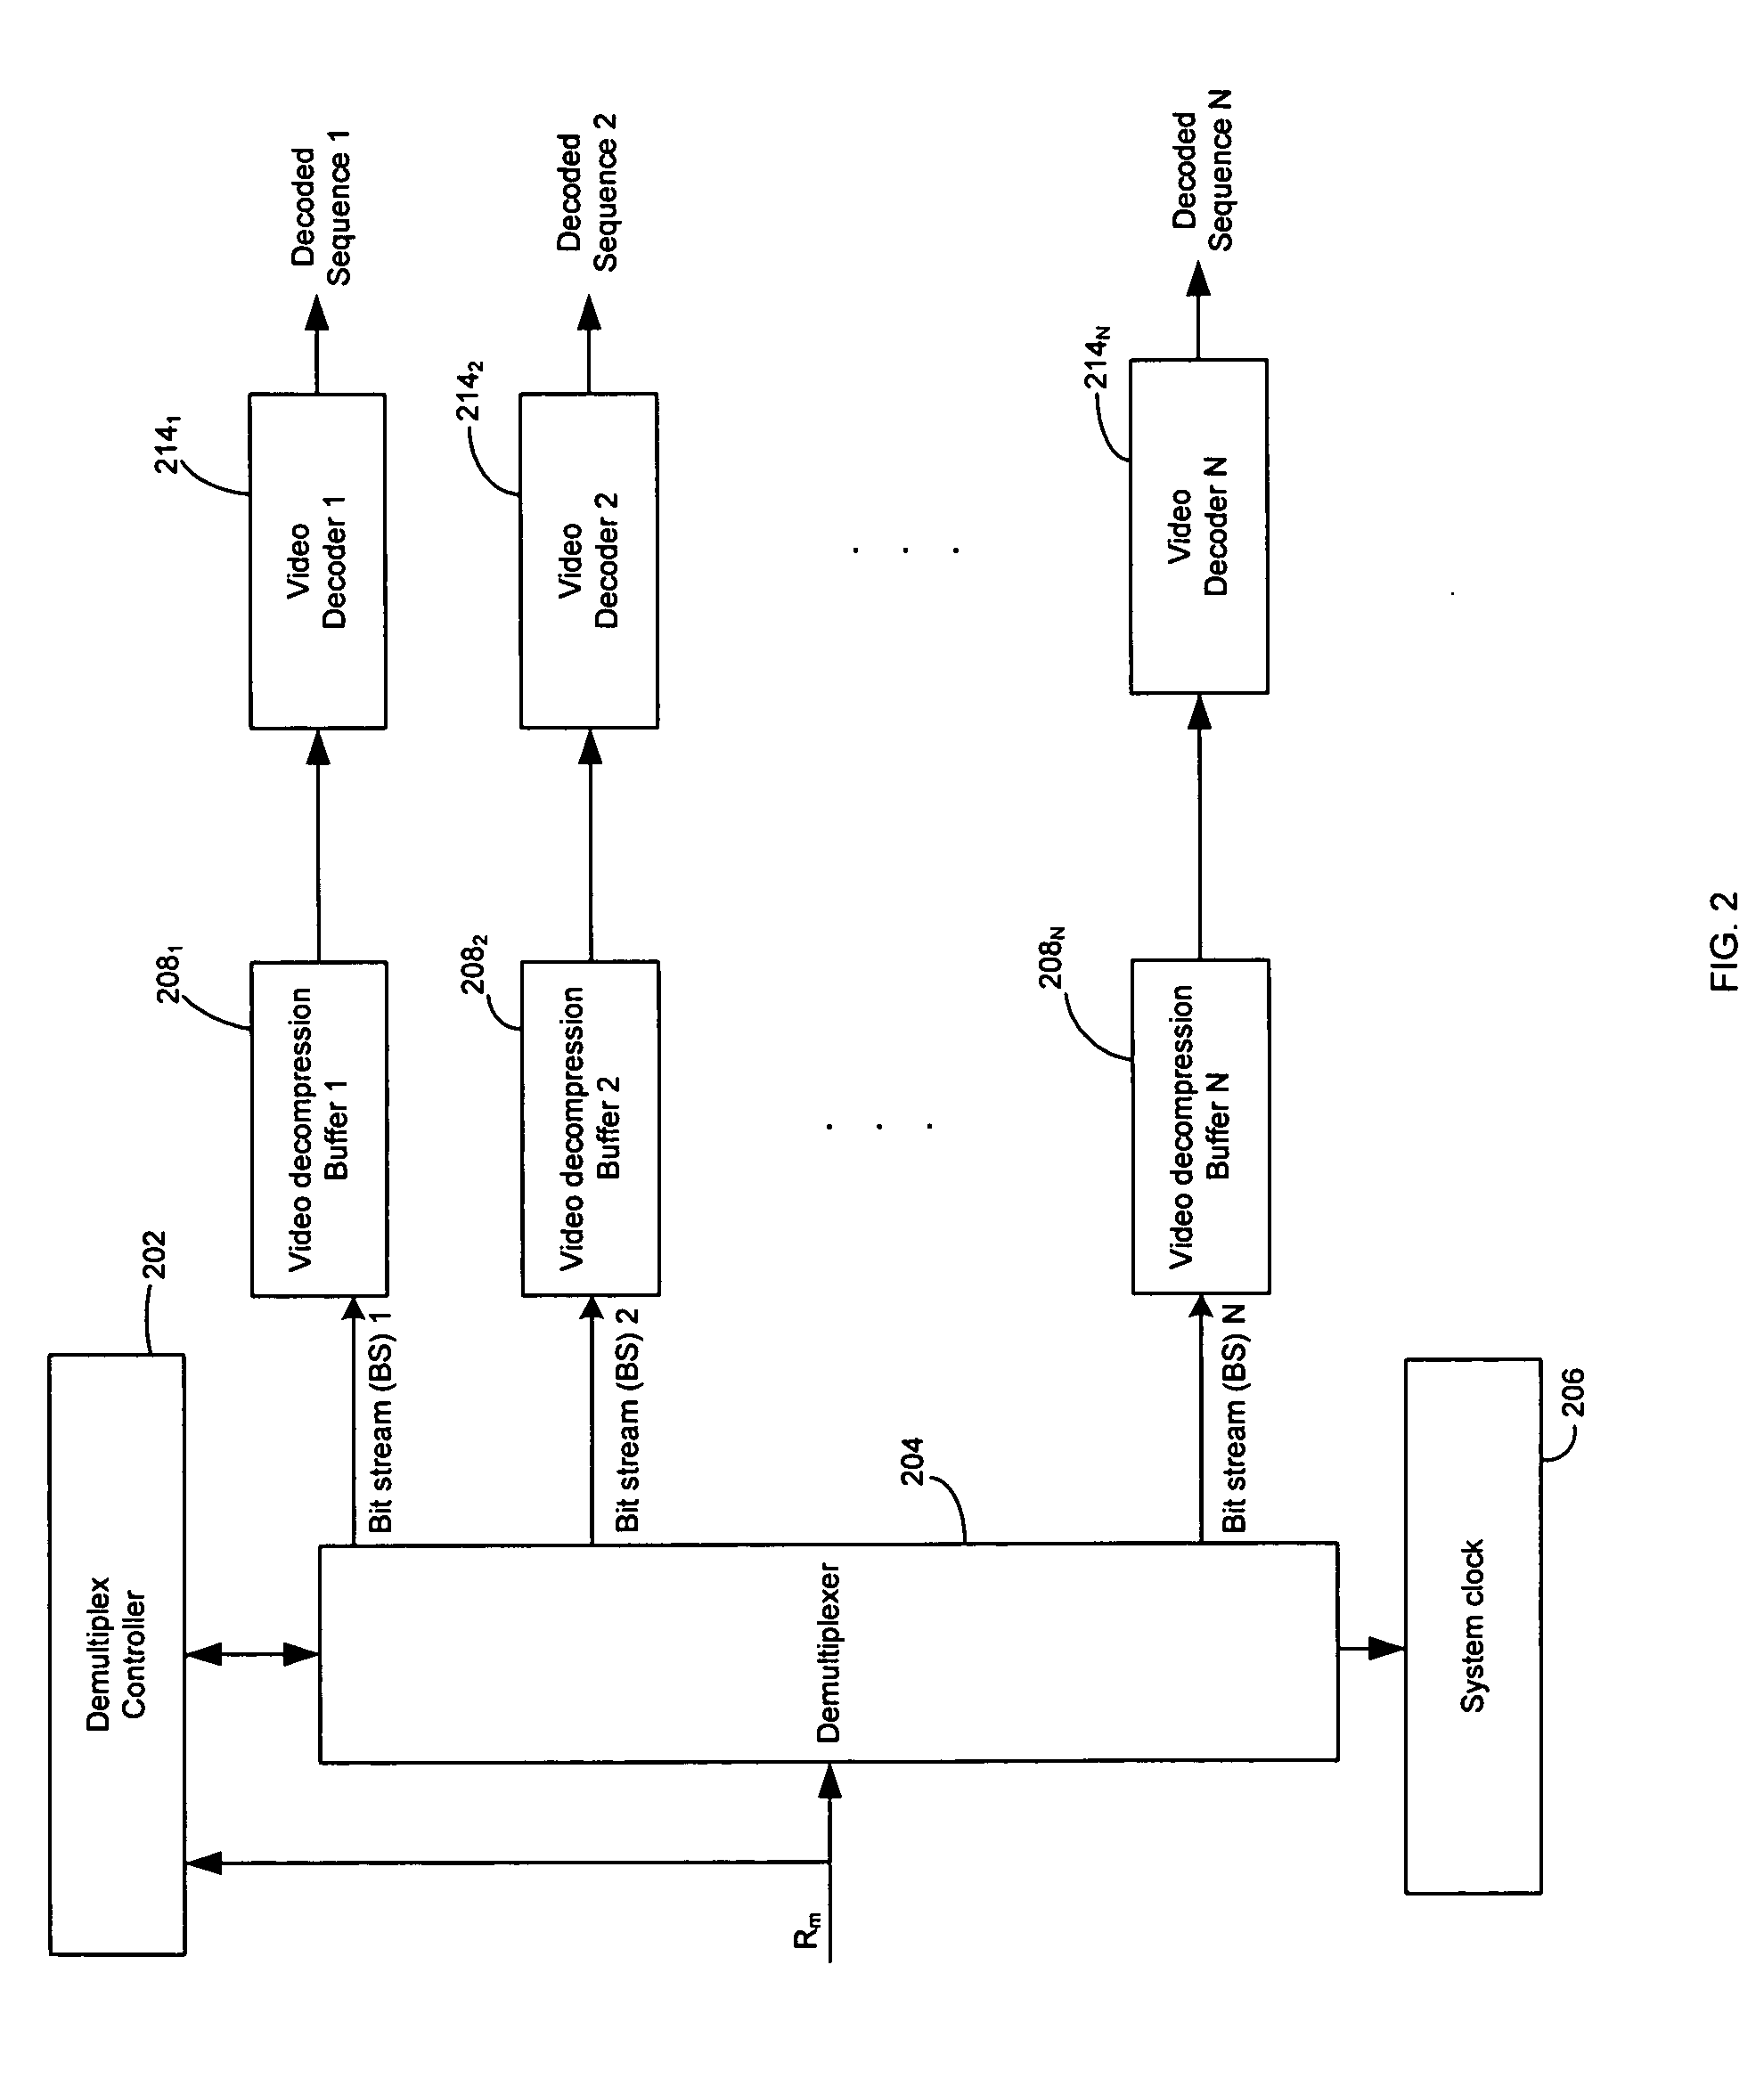 Method and system for dynamically allocating video multiplexing buffer based on queuing theory